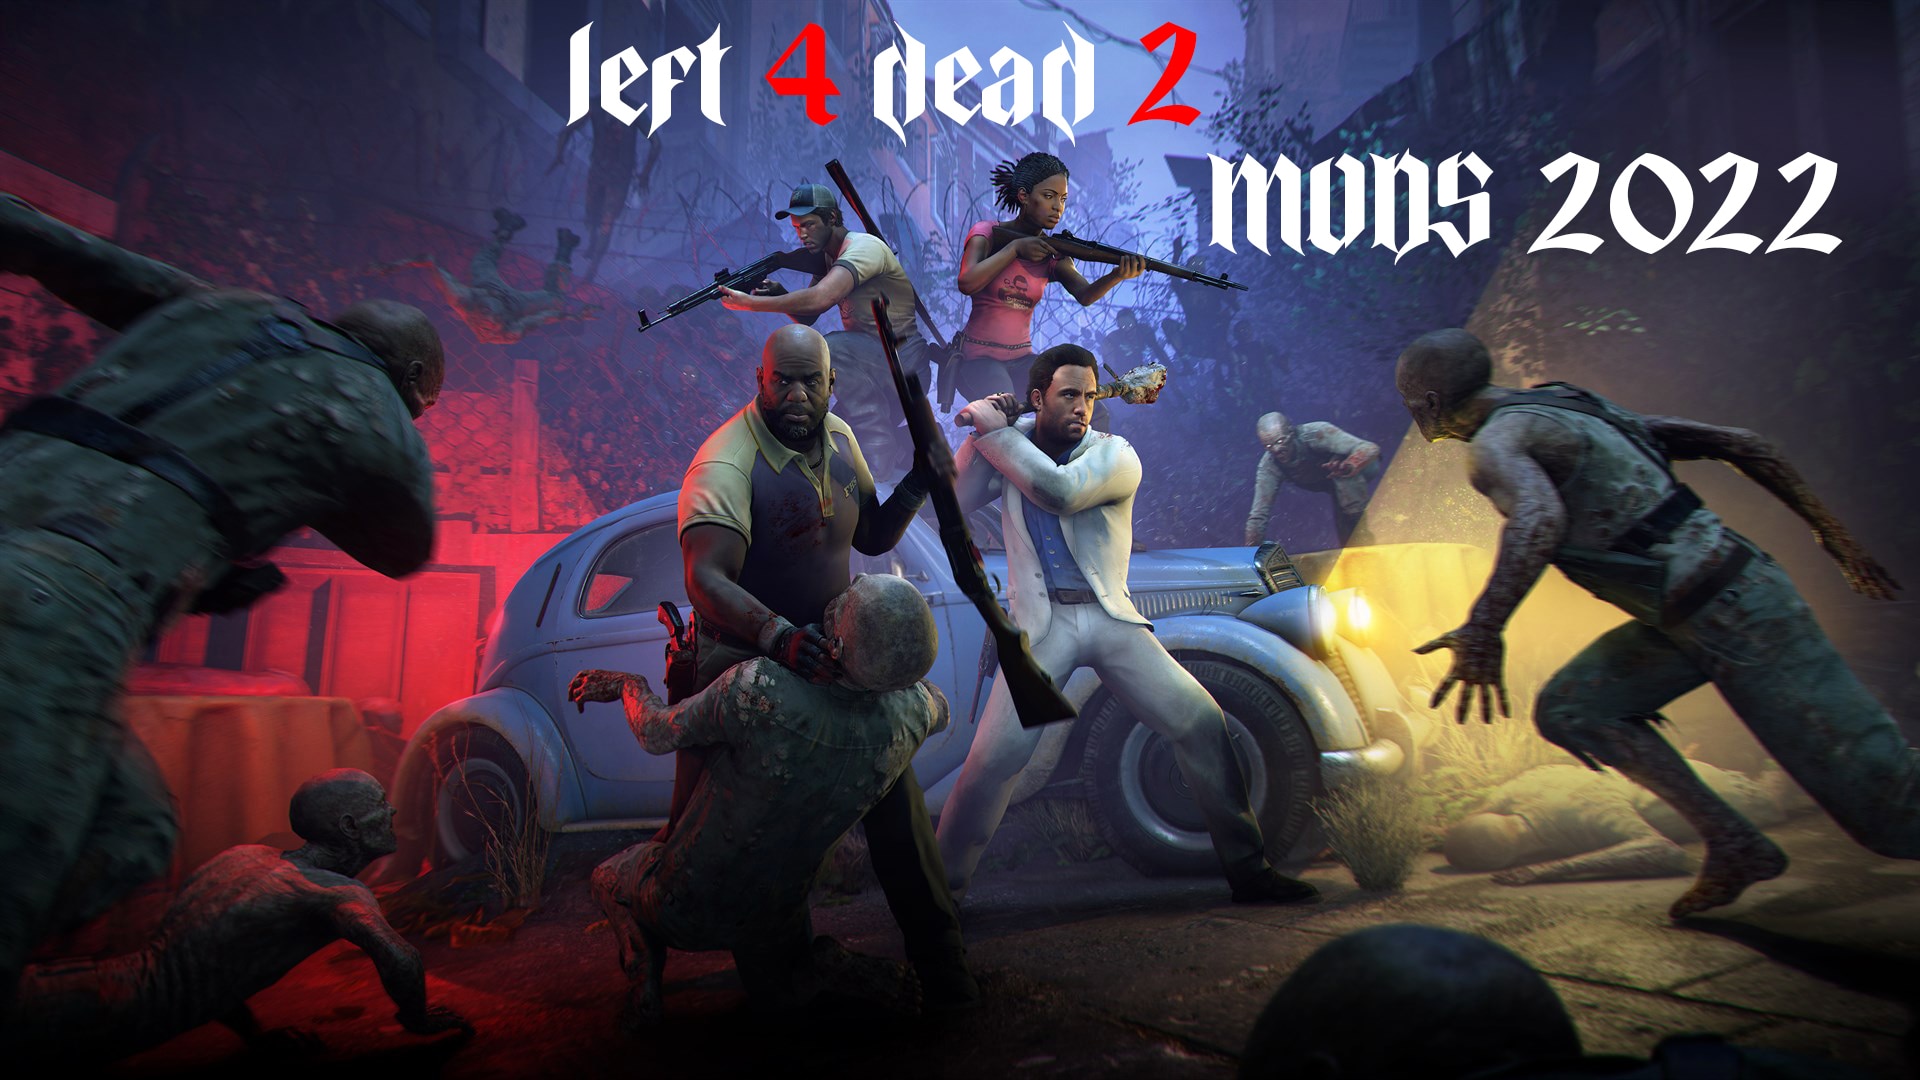 H.O.T.D. End Theme end credits replacement (Mod) for Left 4 Dead 2